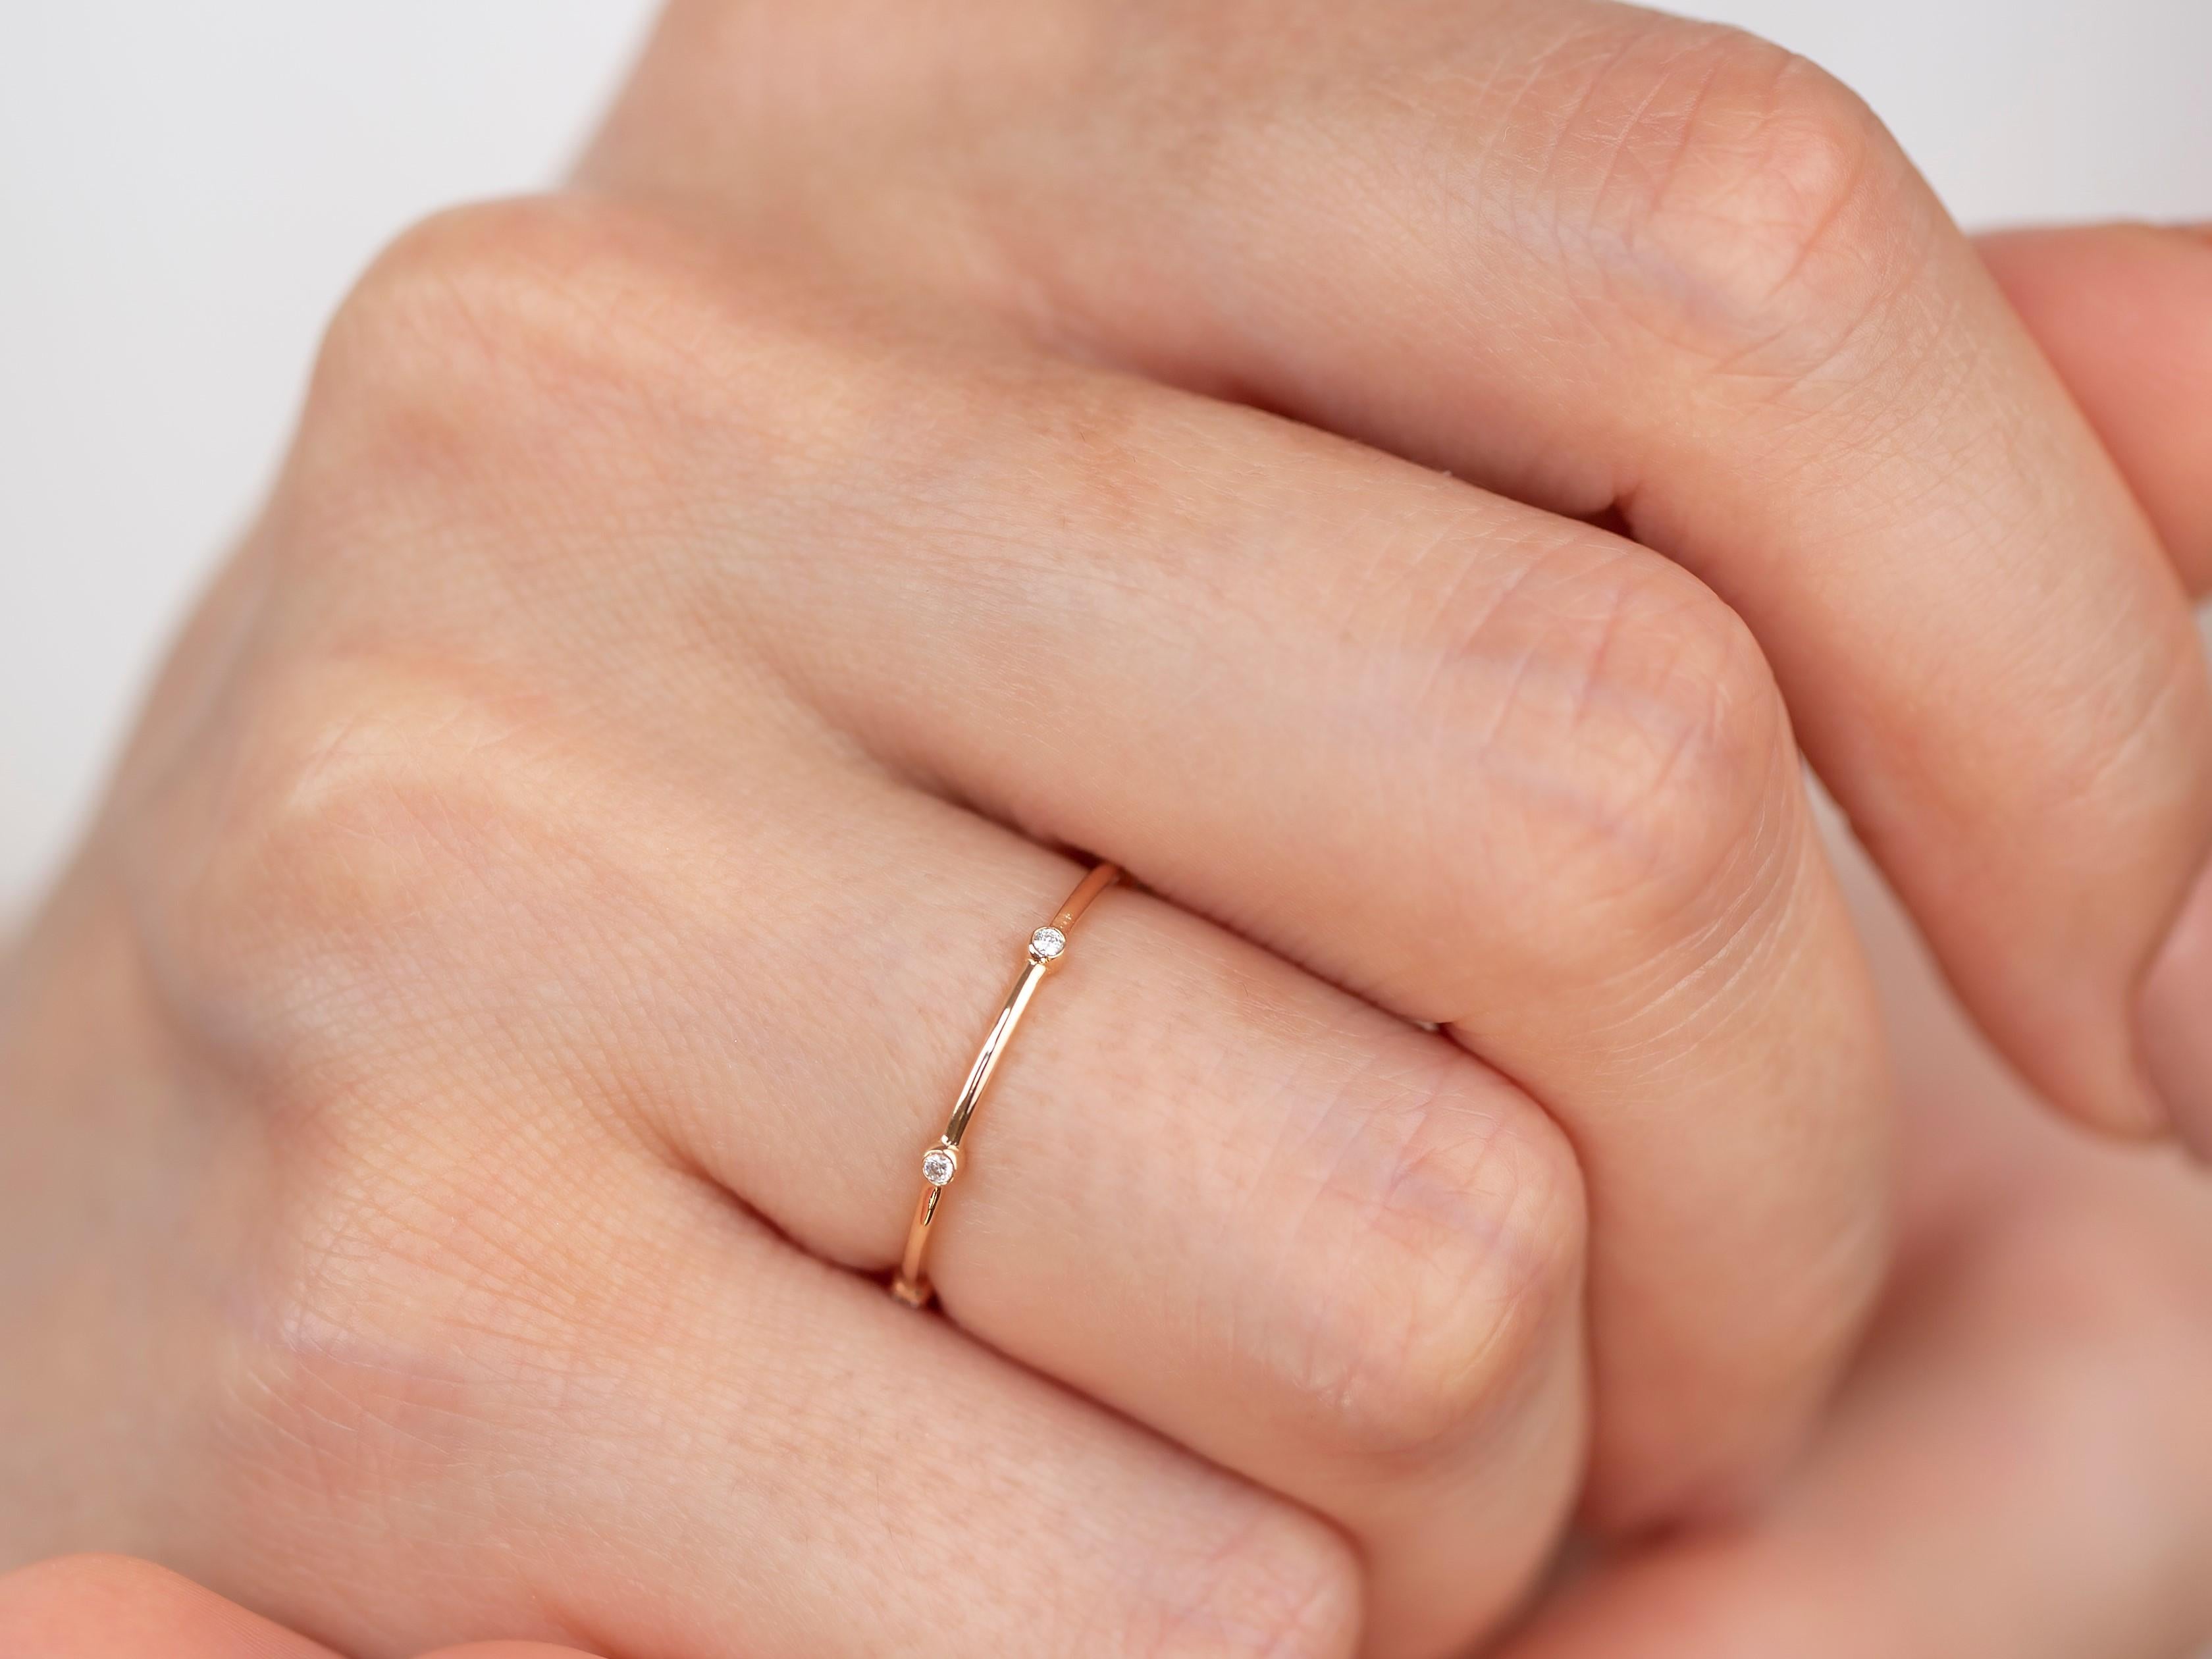 For Sale:  Six Bezel Diamond Ring, 14K Solid Gold Dainty Ring, Stackable Ring, Minimalist 2